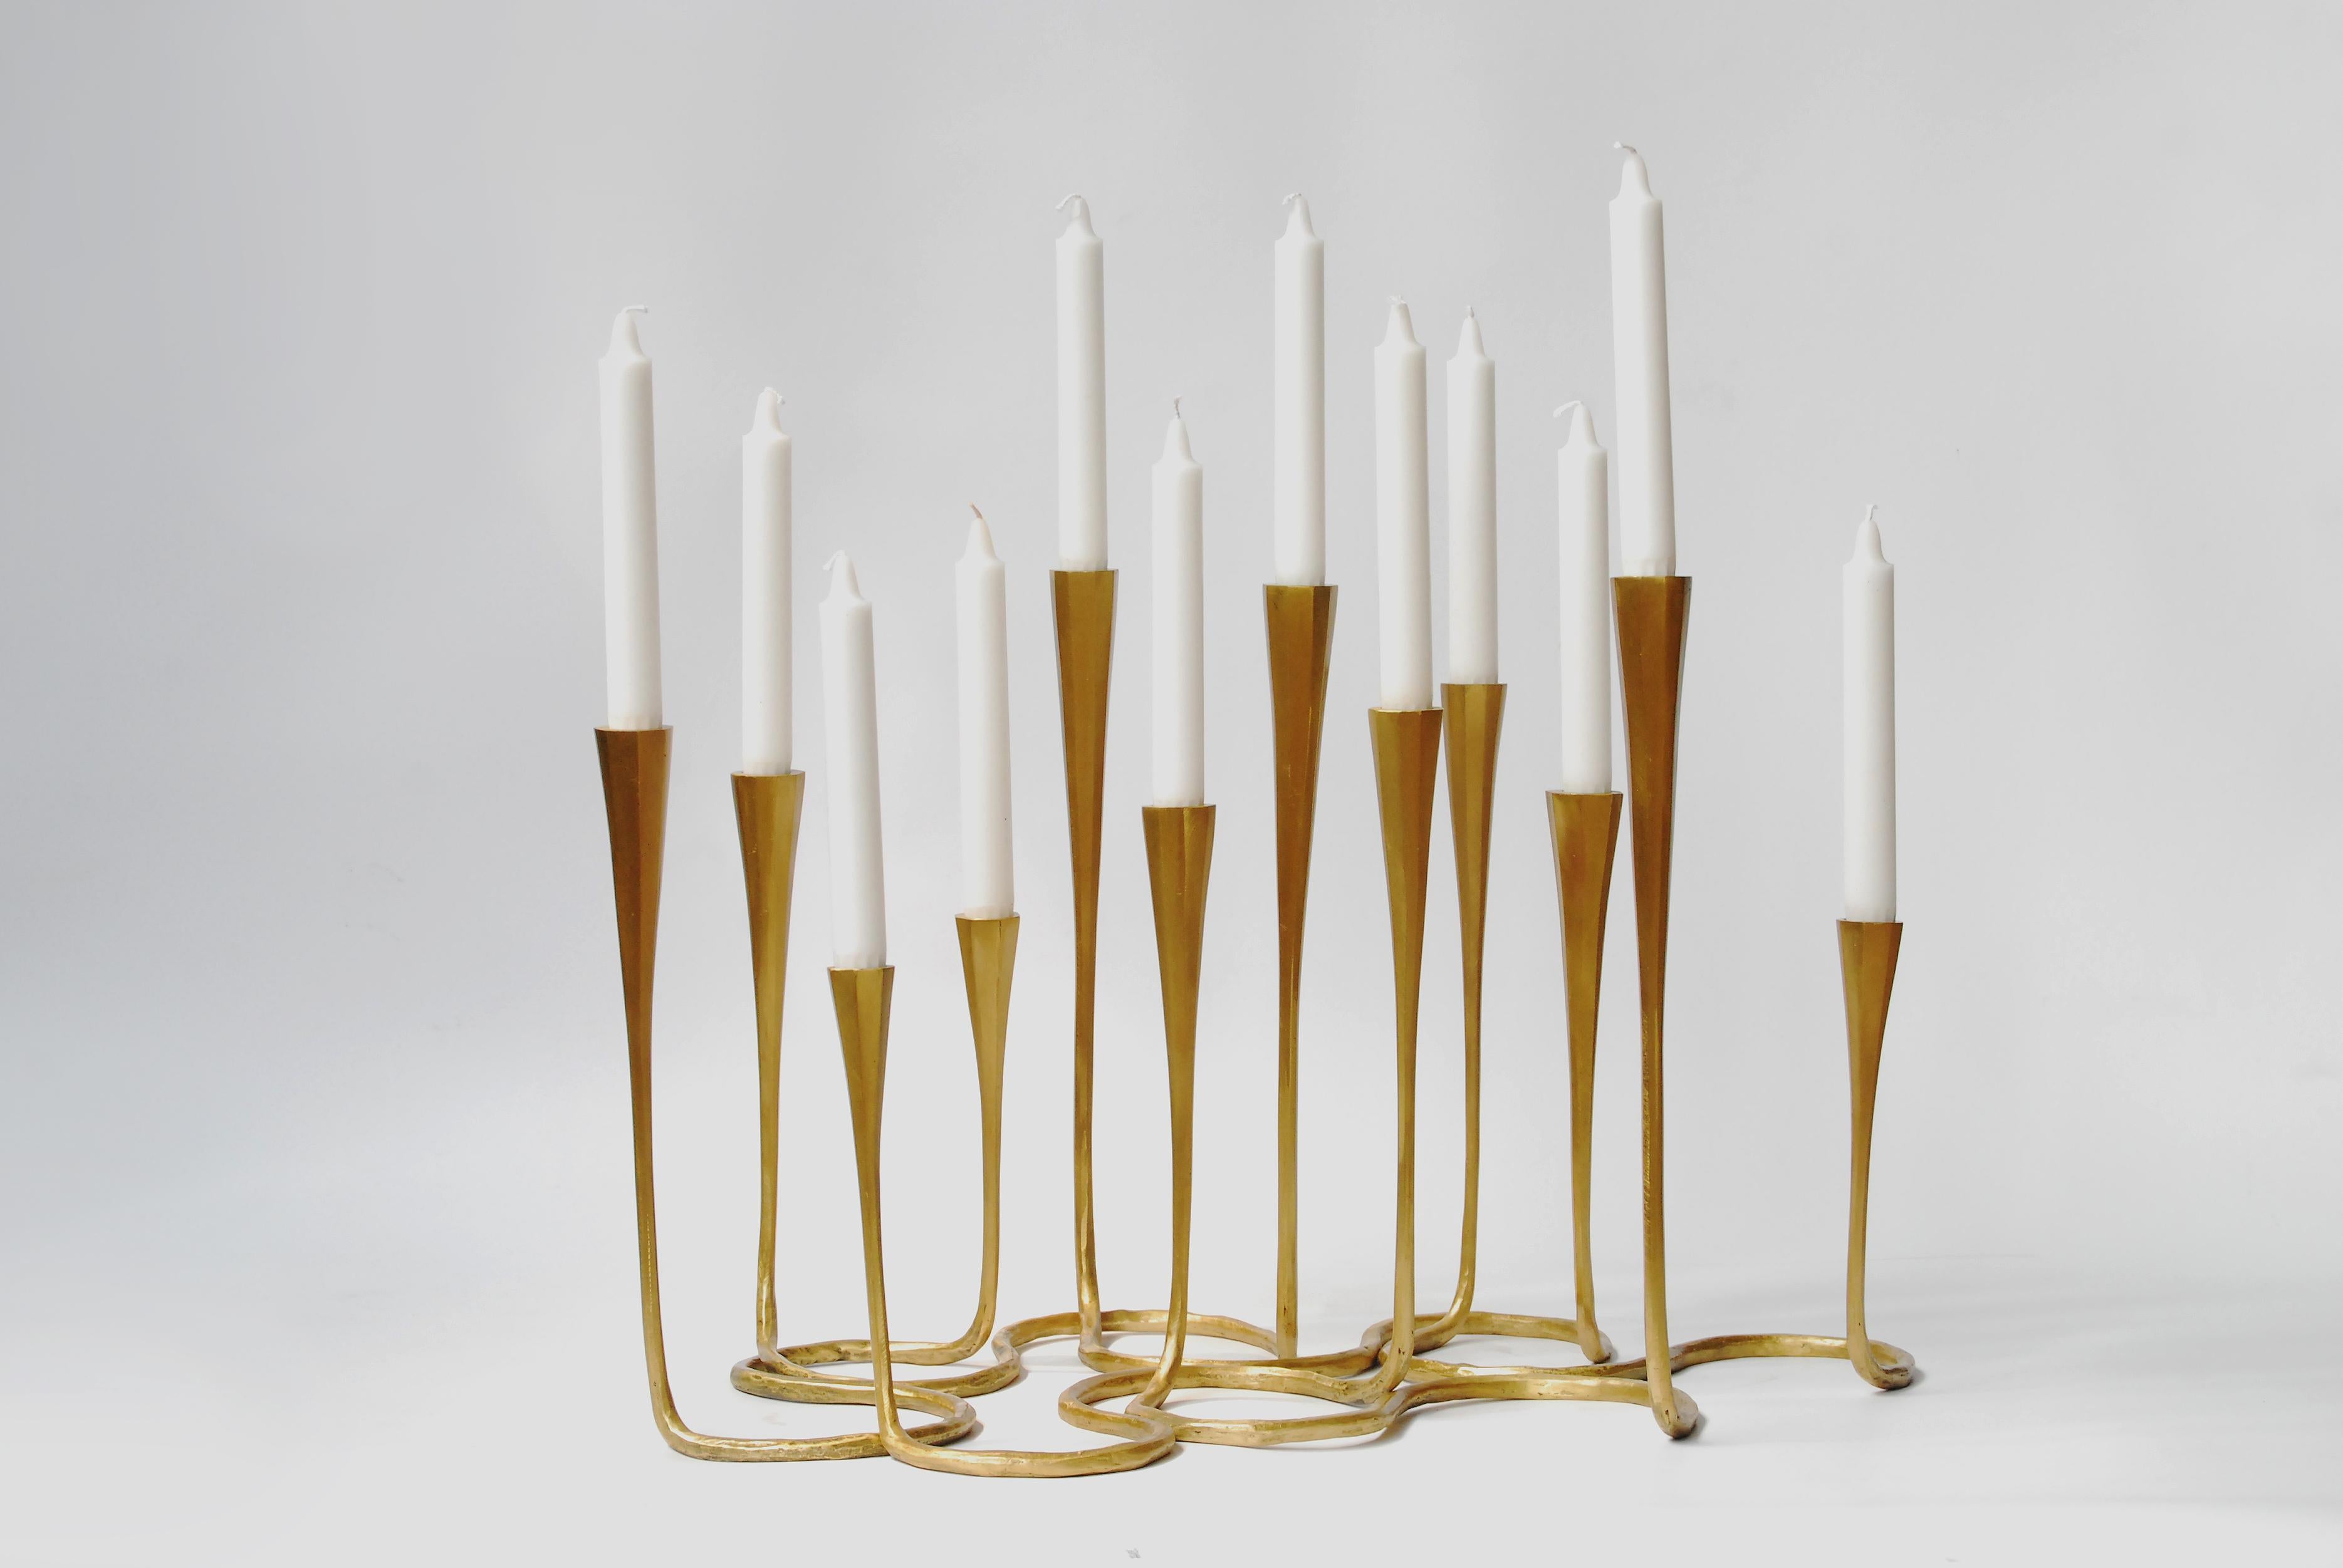 Available now at the Elan Atelier NY Showroom and ready to ship! 

Sculptural candleholders cast in bronze using the lost wax method. Each daisy comes as a set of two candlestands joined at the base. Combine several to create a stunning candlelit